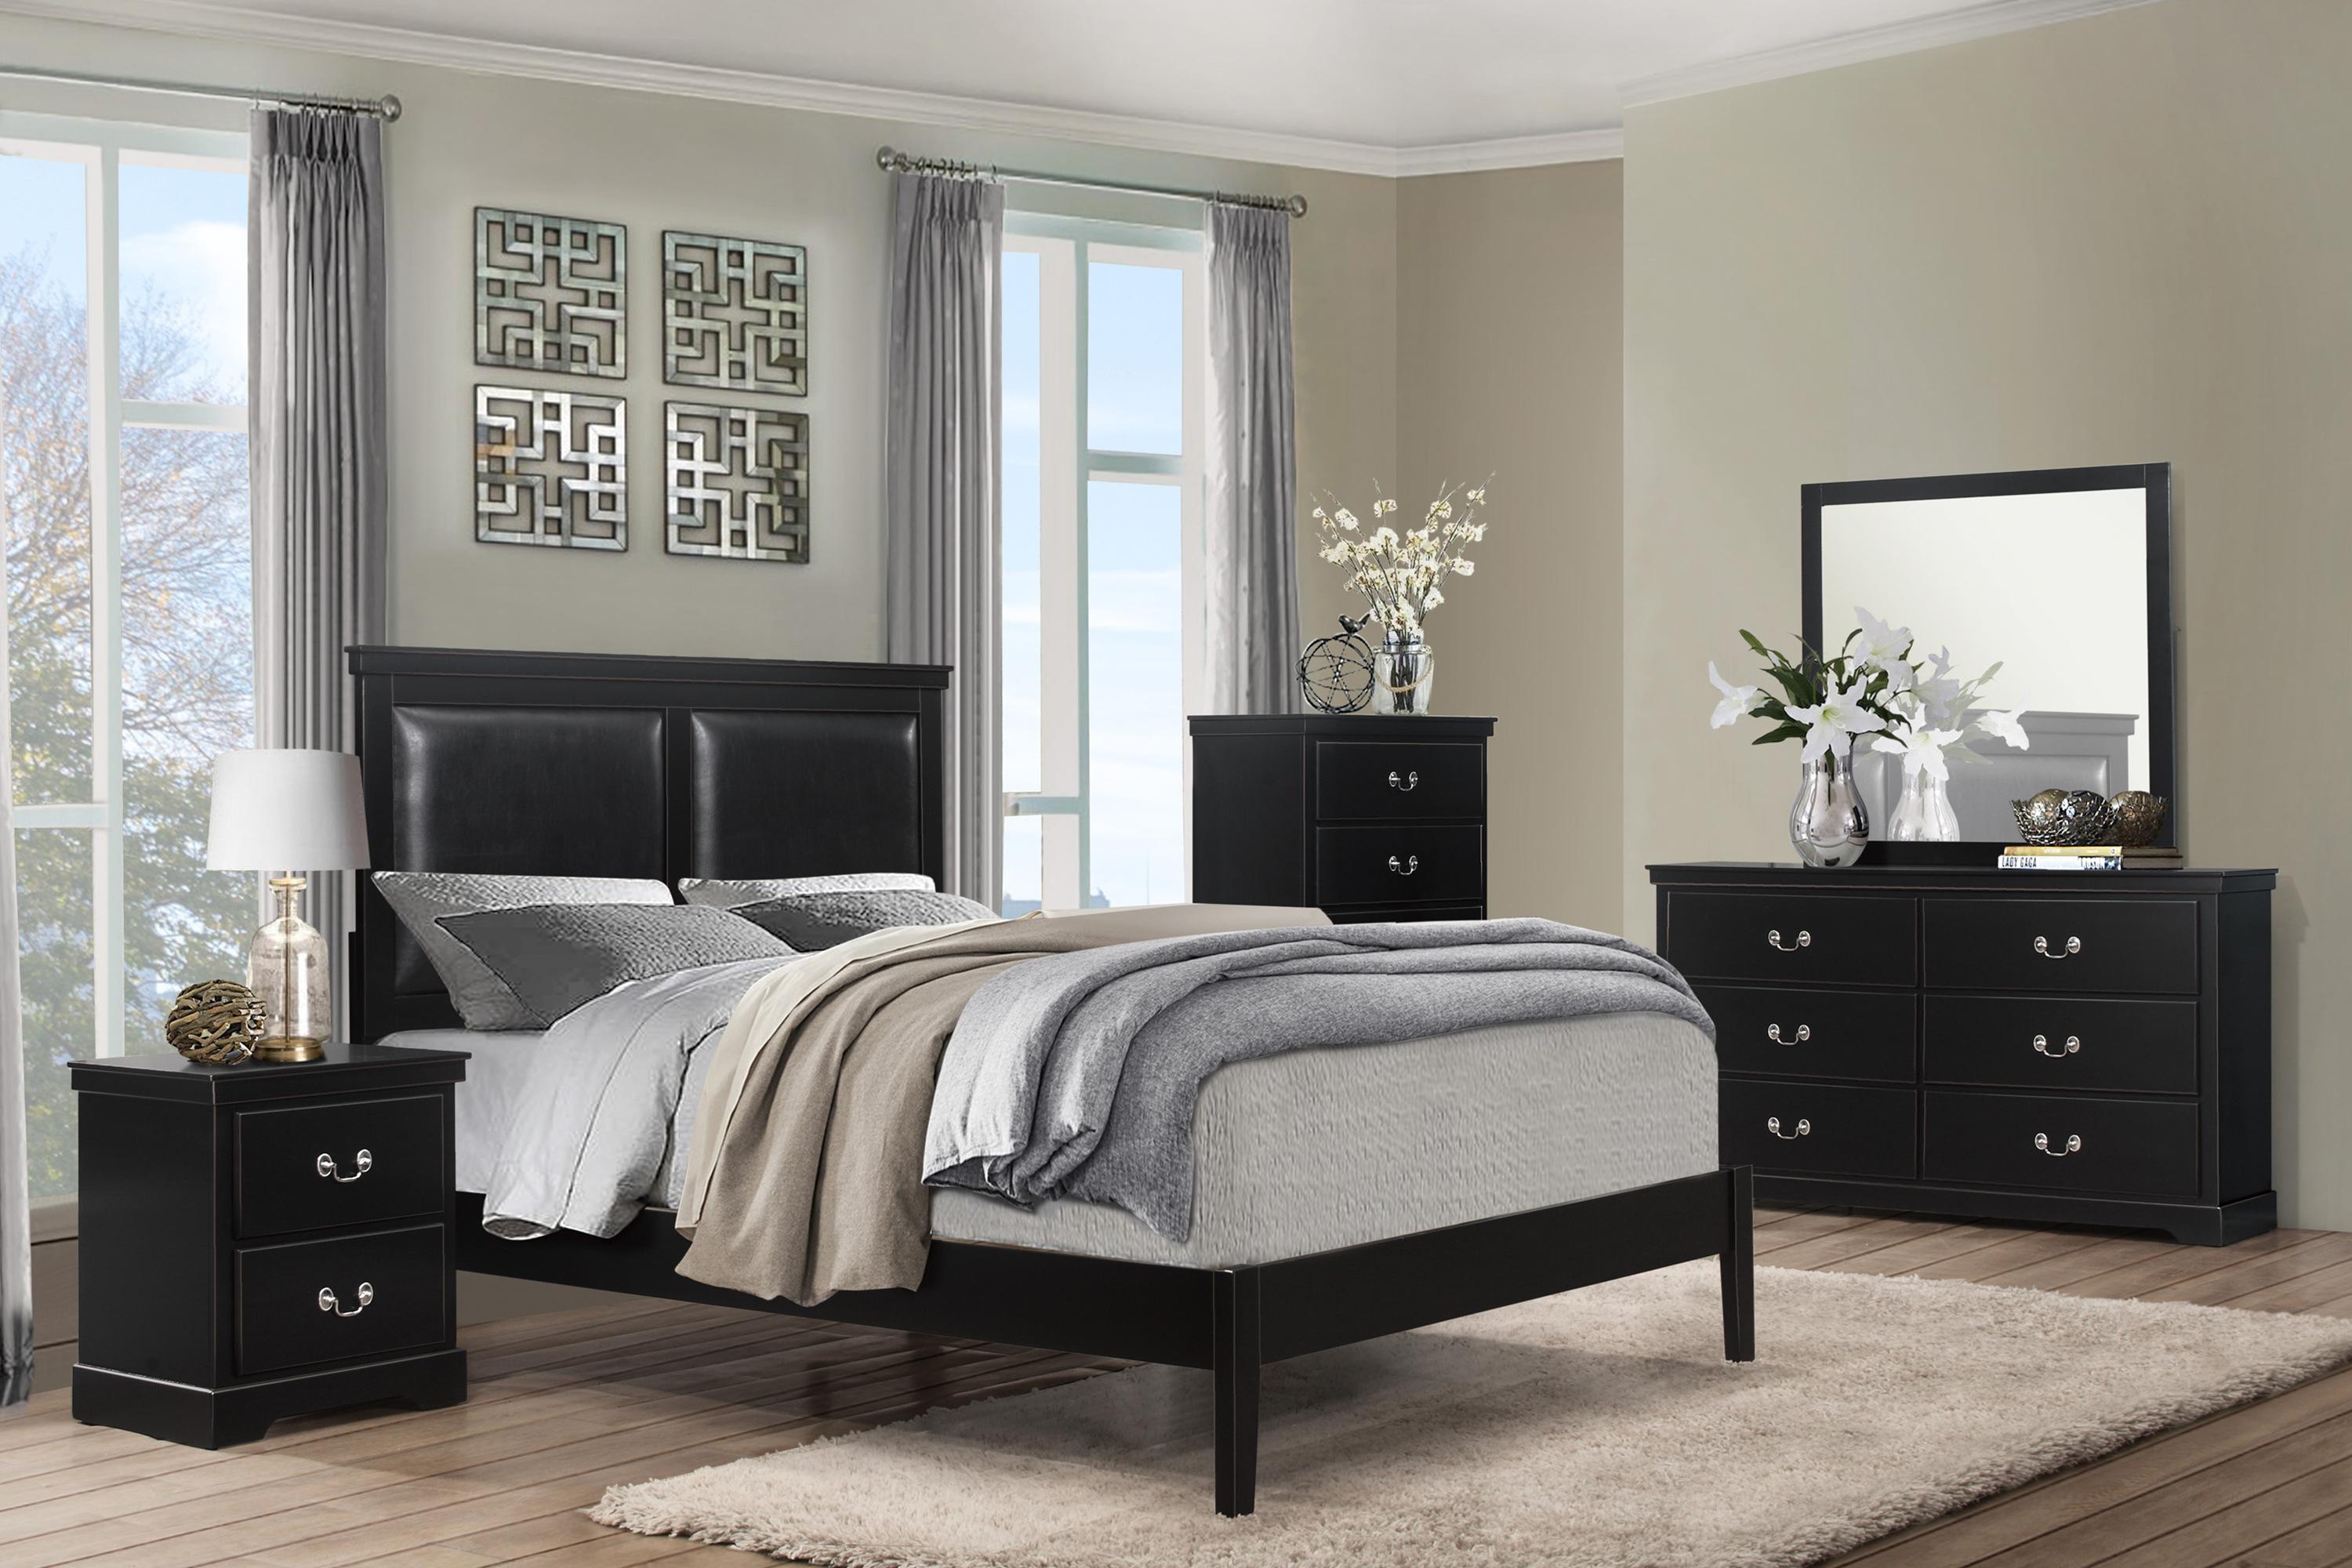 Modern Bedroom Set 1519BKF-1-6PC Seabright 1519BKF-1-6PC in Black Faux Leather